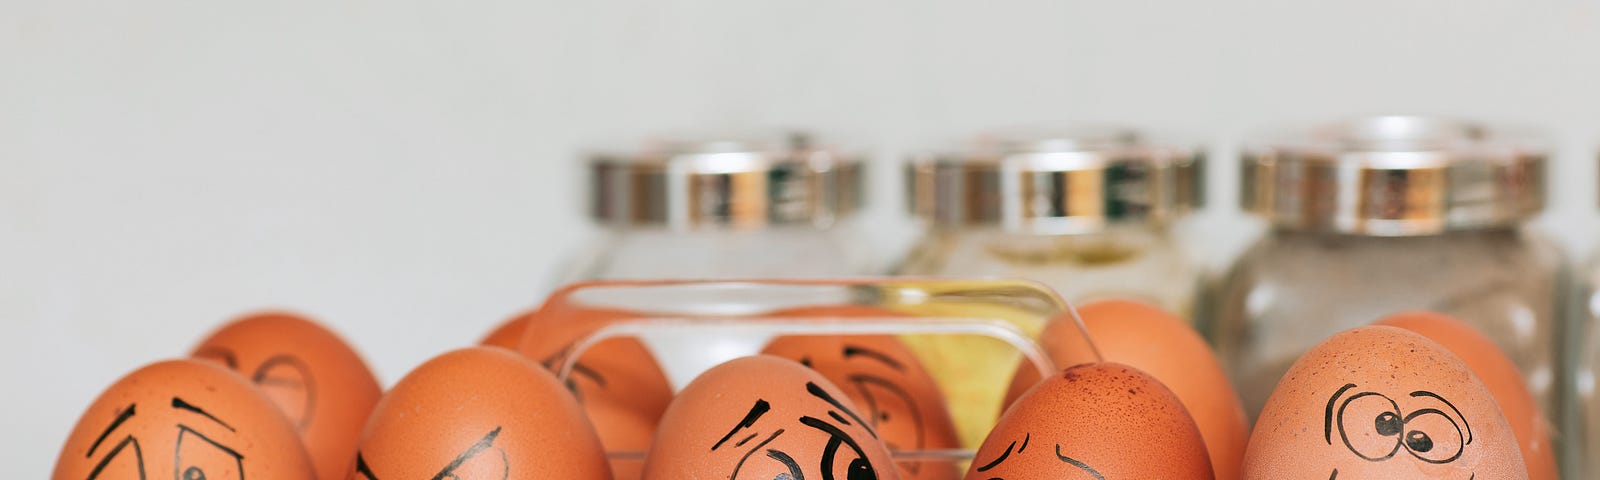 Five brown eggs with funny faces drawn on them.